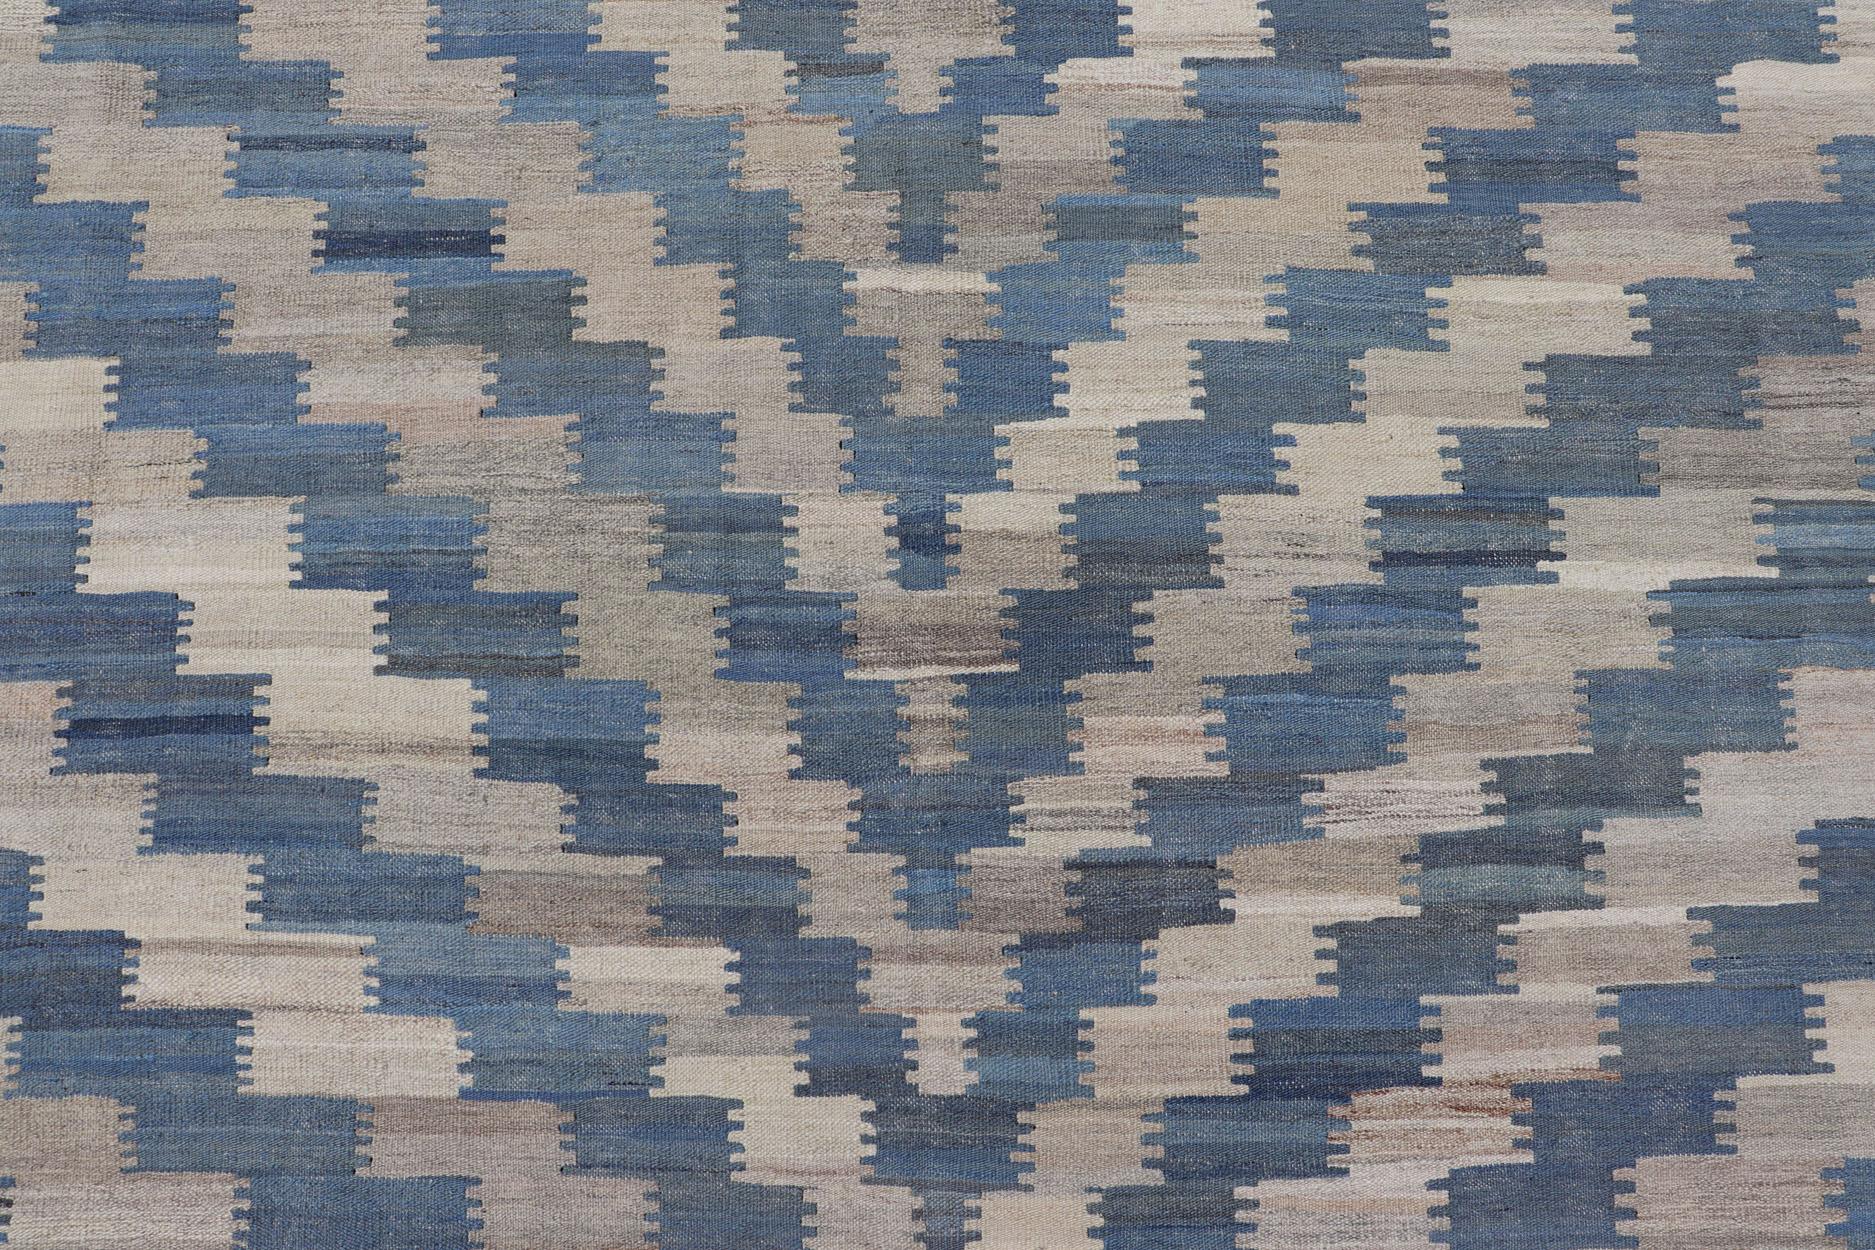 Wool Flat-Weave Kilim Rug with a Modern Design in Blue, and Creams For Sale